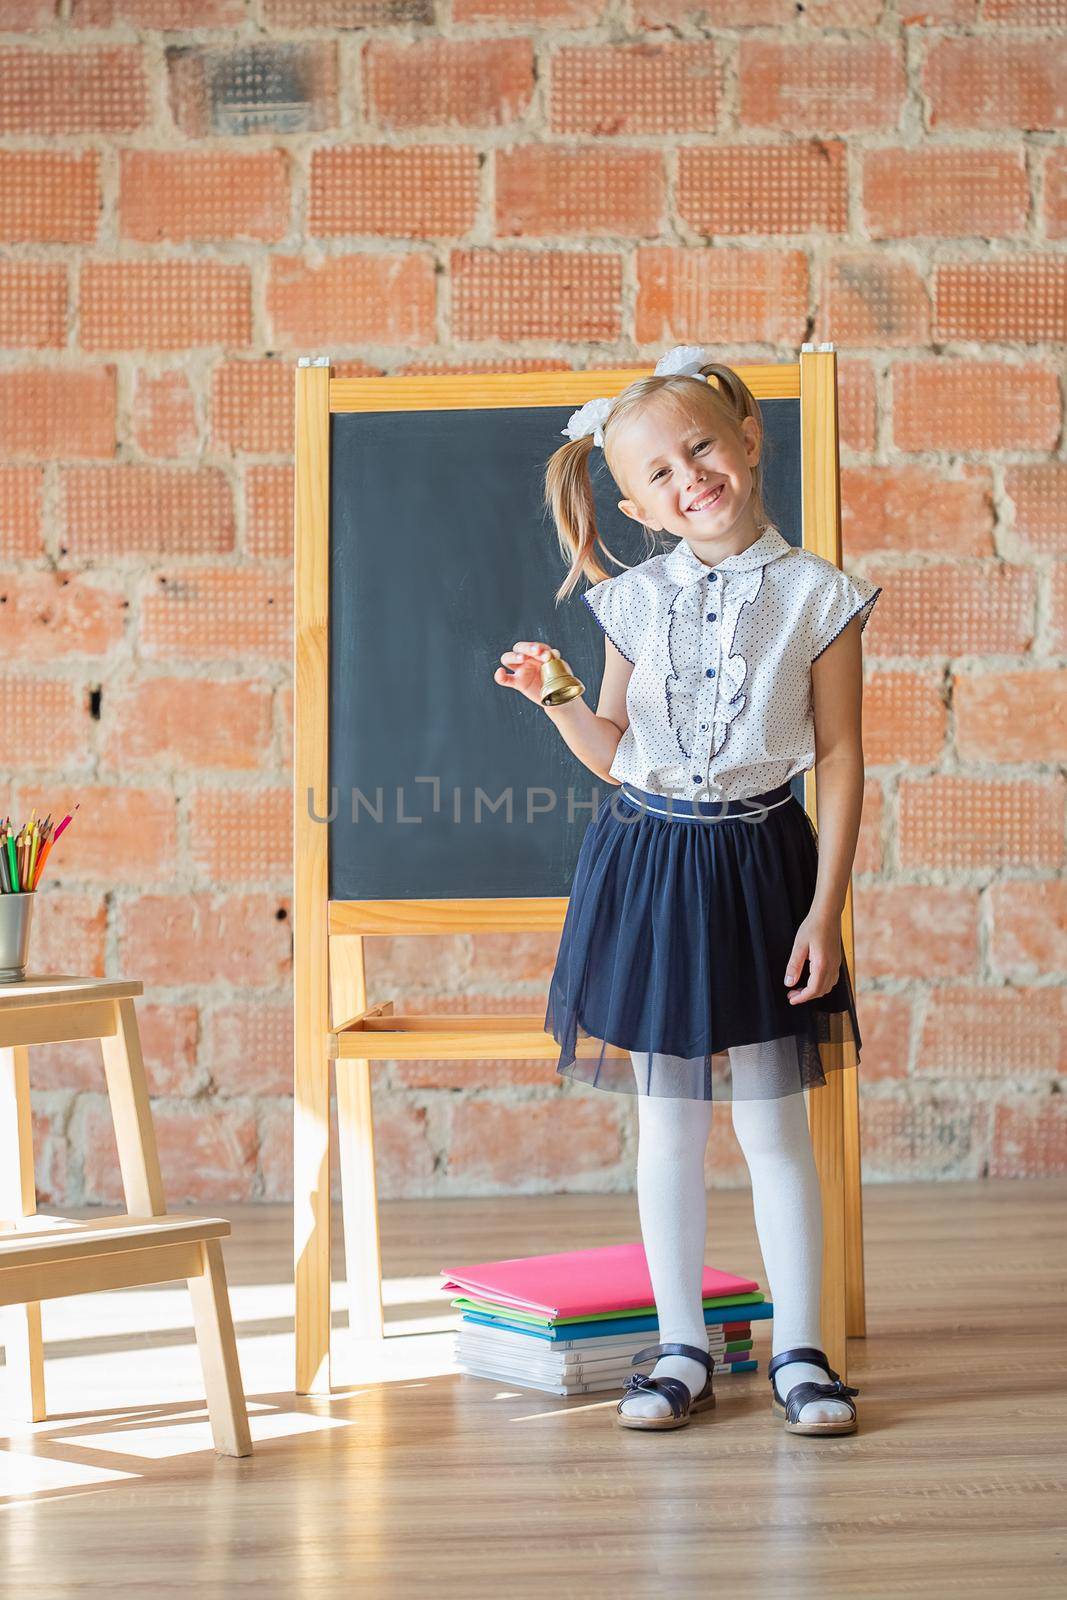 Adorable private schoolgirl in front of blackboard with a bell in her hands by galinasharapova